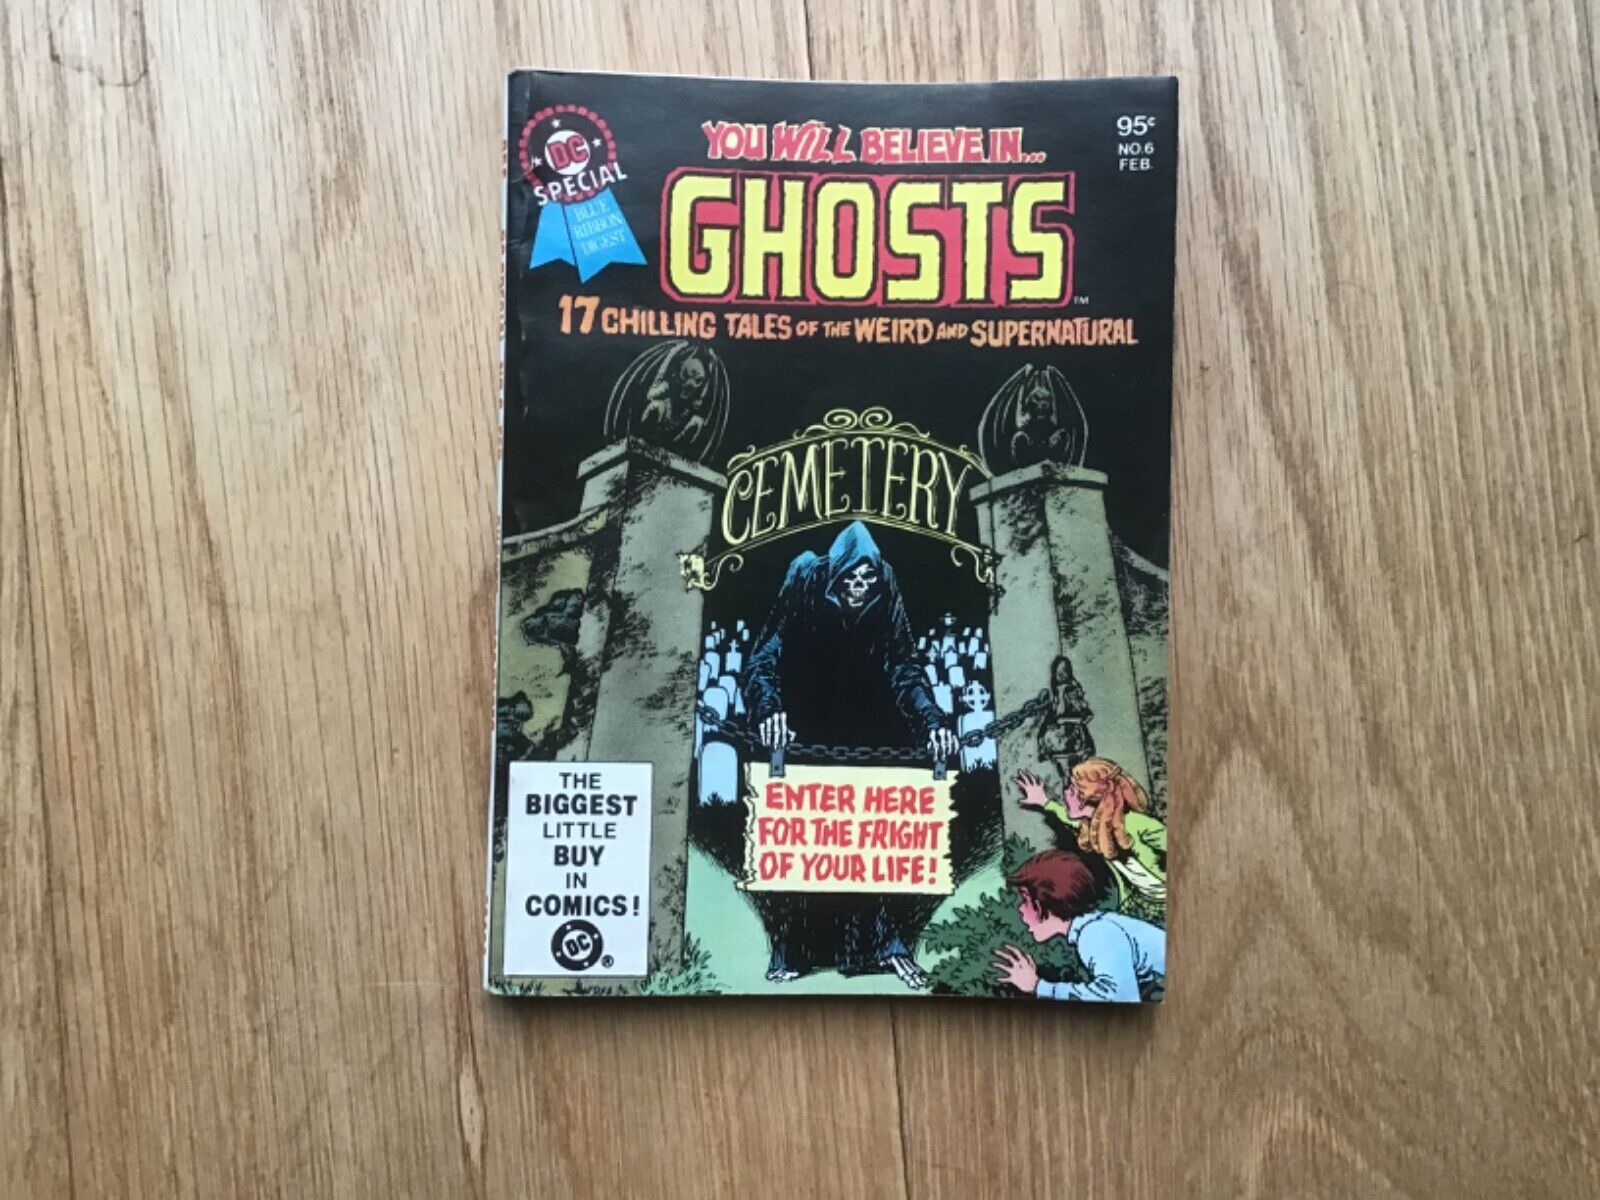 RARE DC Special Blue Ribbon Digest #6 You Will Believe In Ghosts 1981